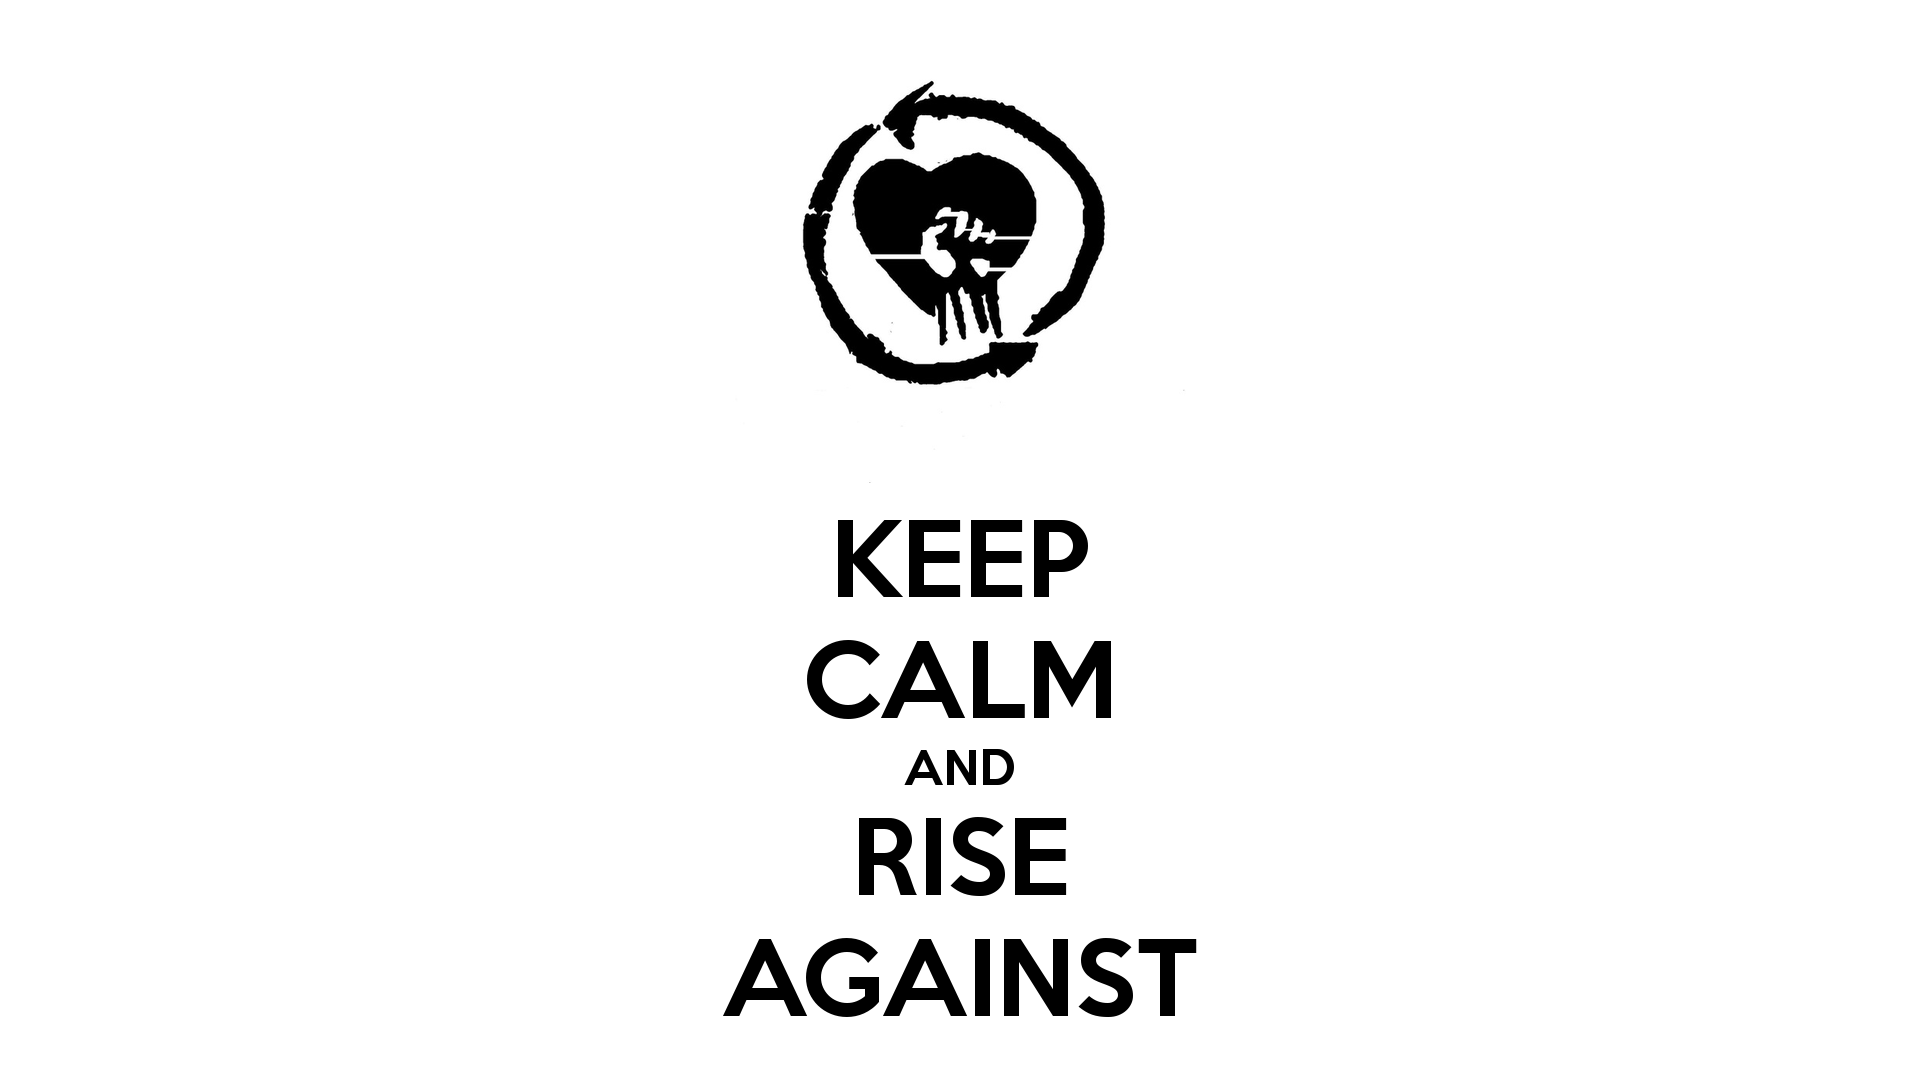 KEEP CALM AND RISE AGAINST CALM AND CARRY ON Image Generator